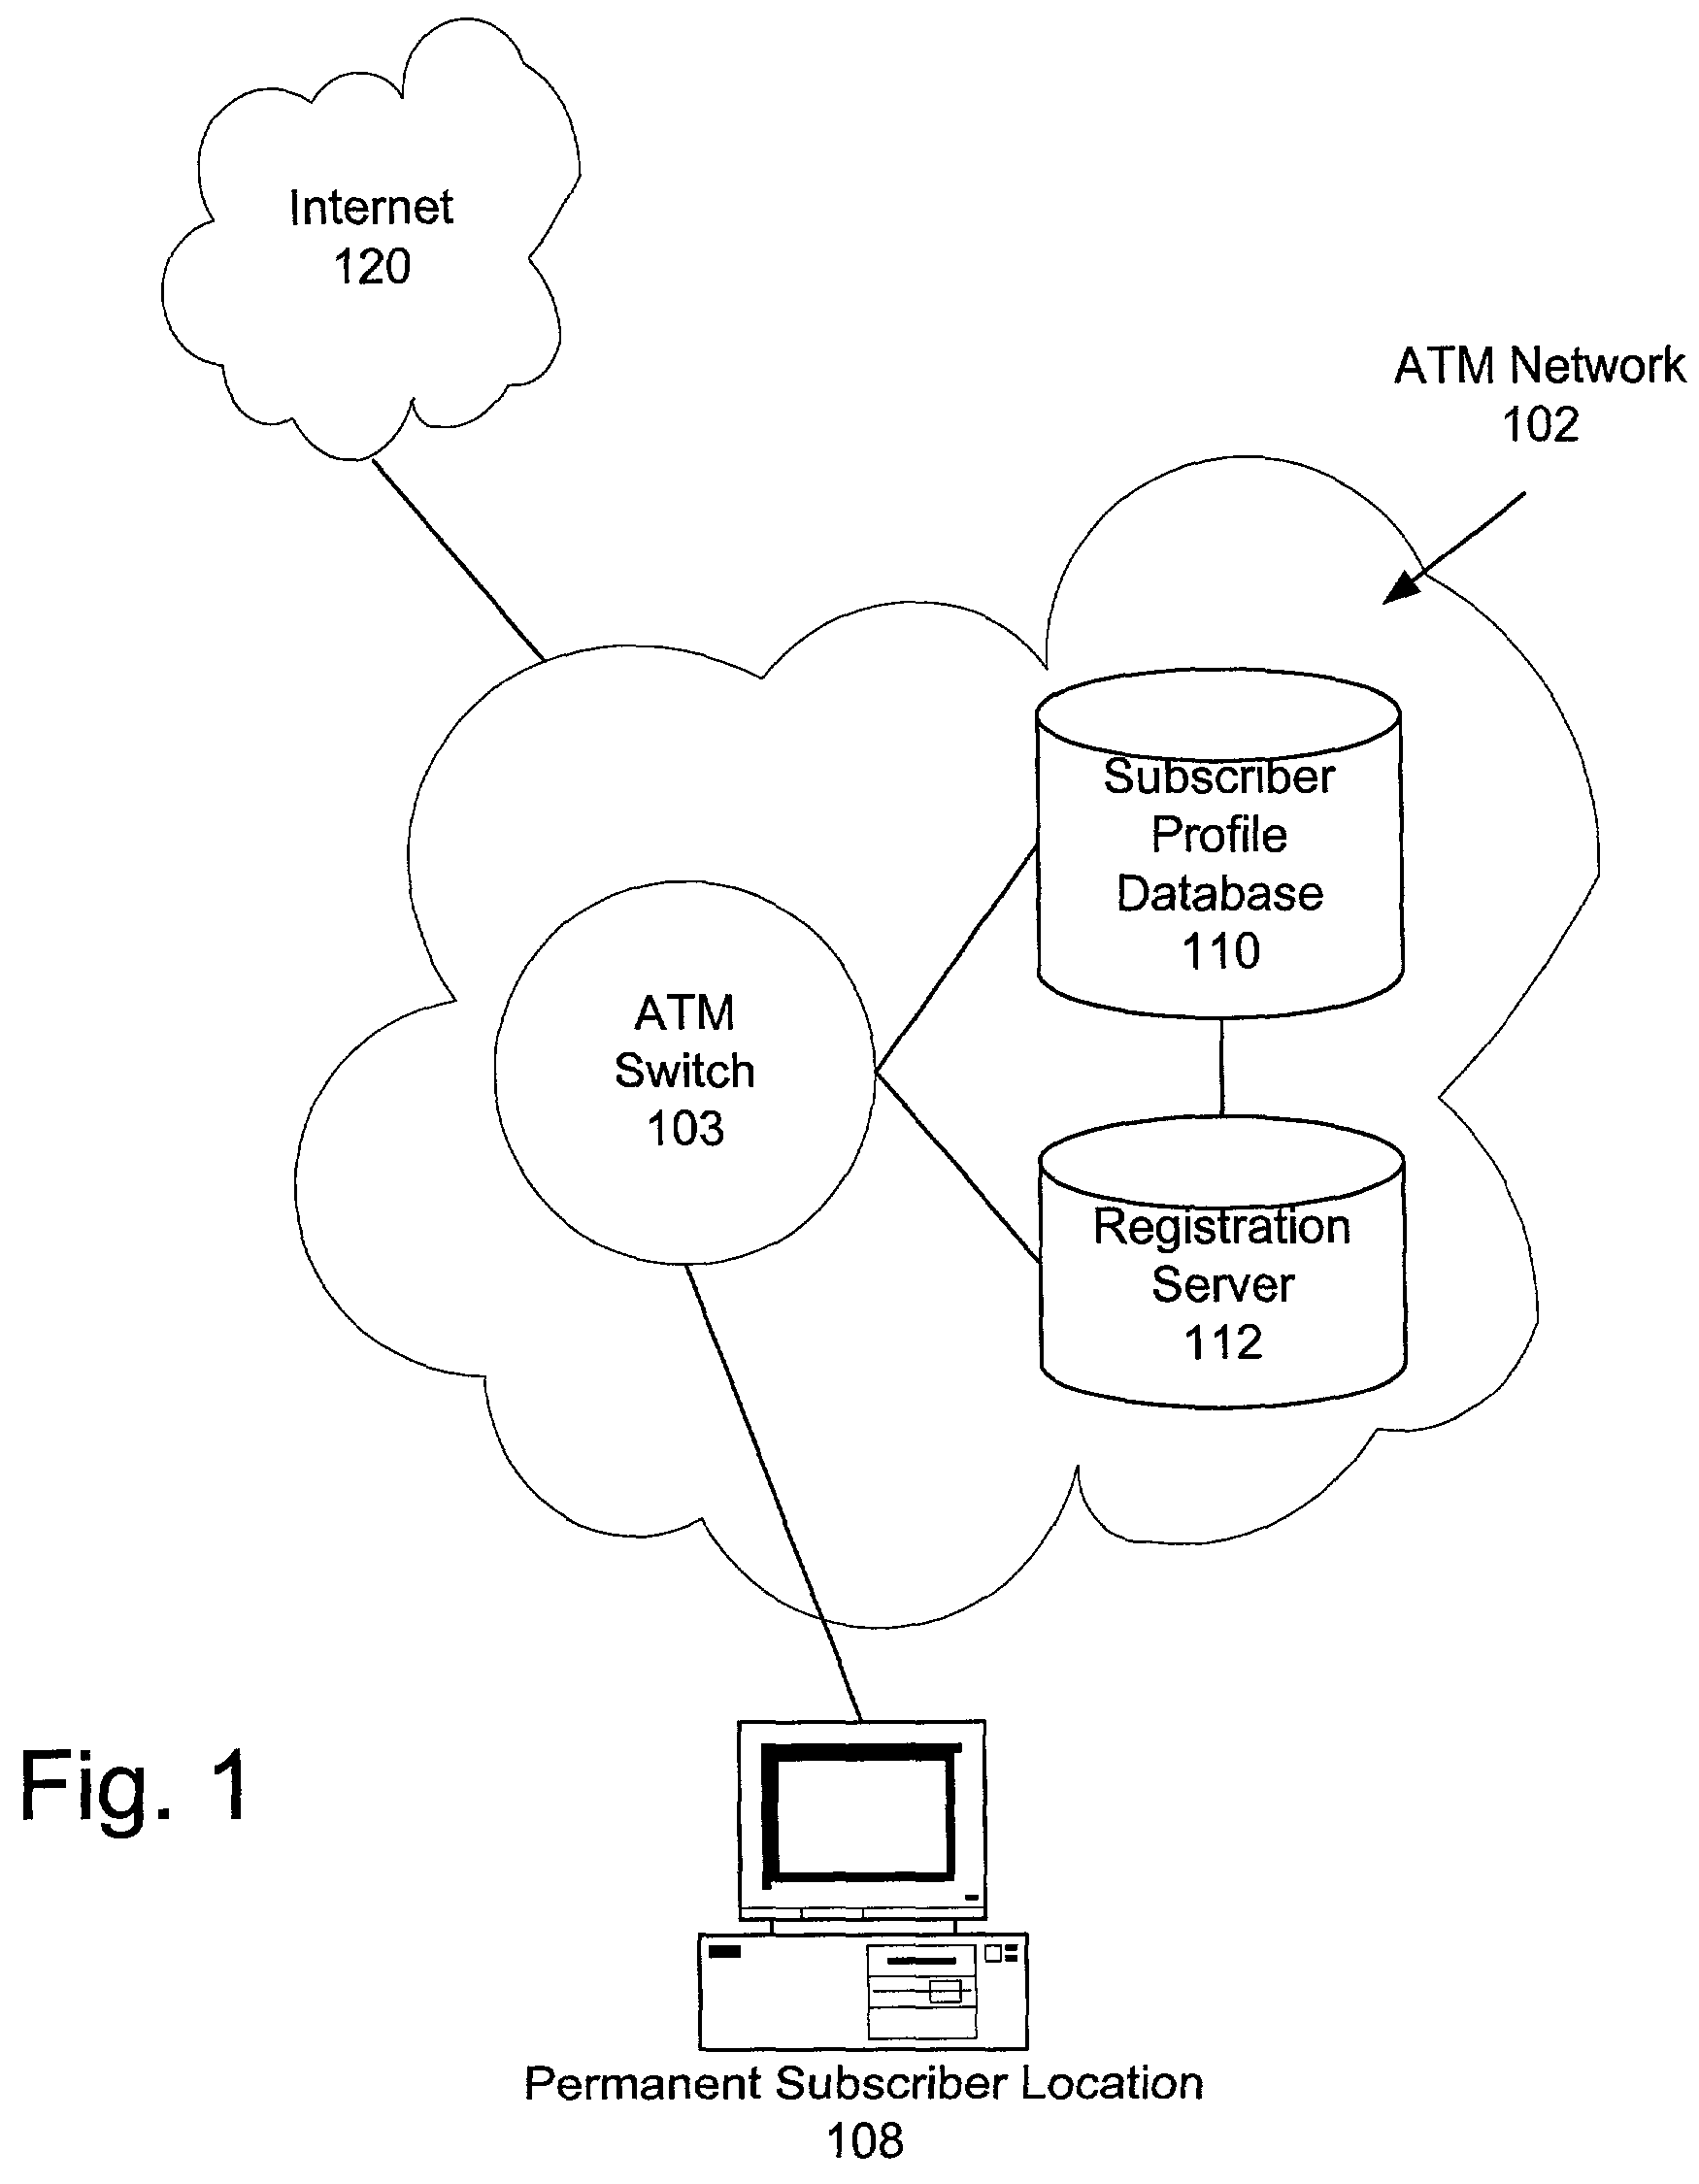 Authentication for use of high speed network resources